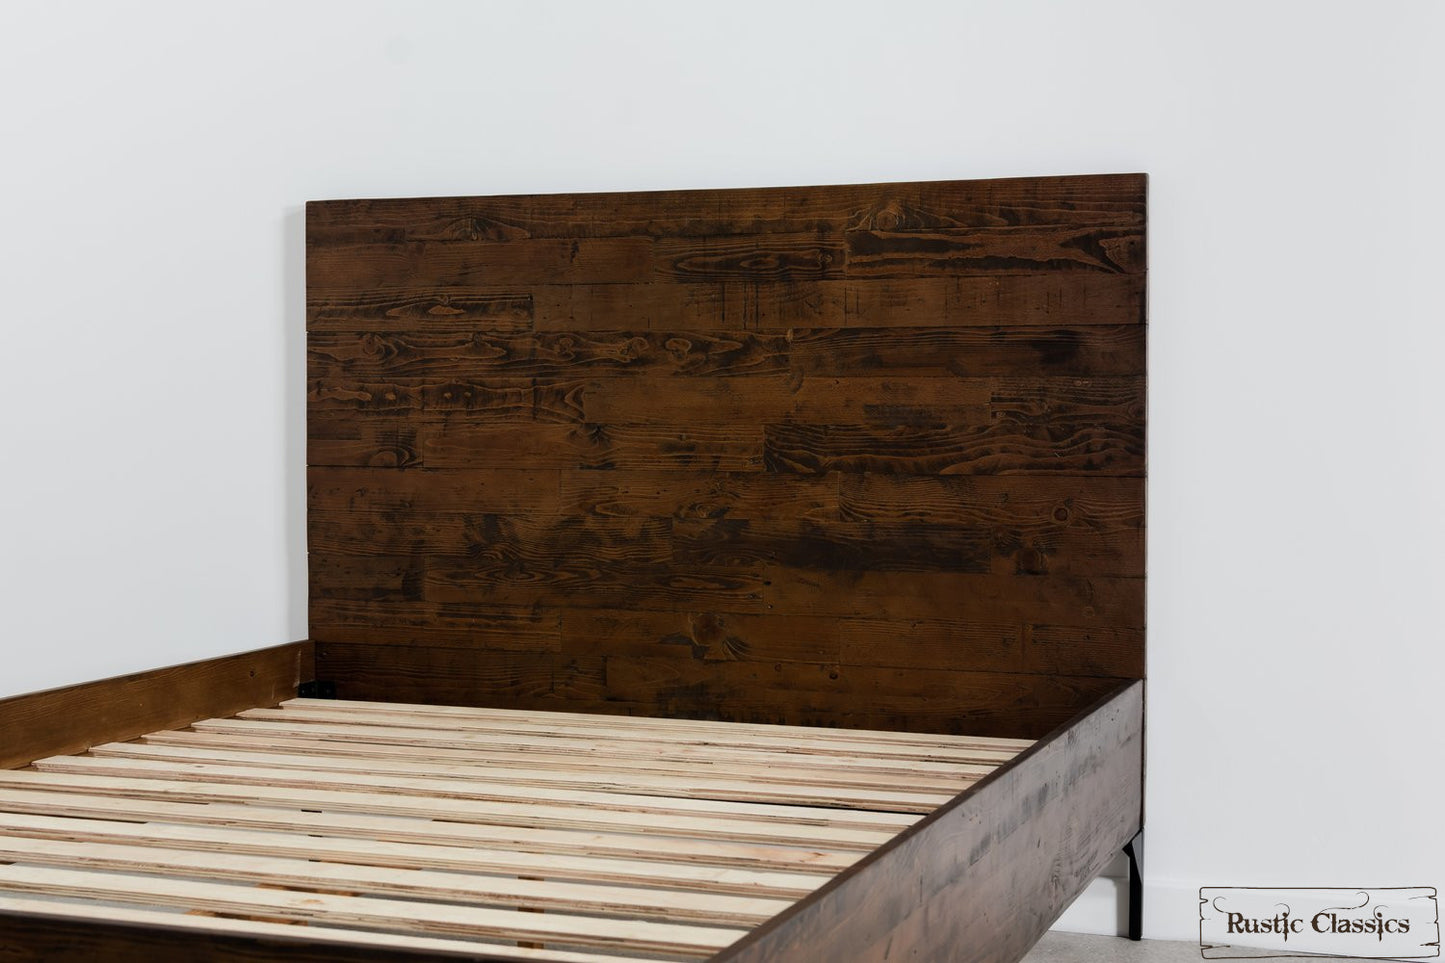 Blackcomb Reclaimed Wood and Metal Platform Bed in Coffee Bean - Available in 2 Sizes